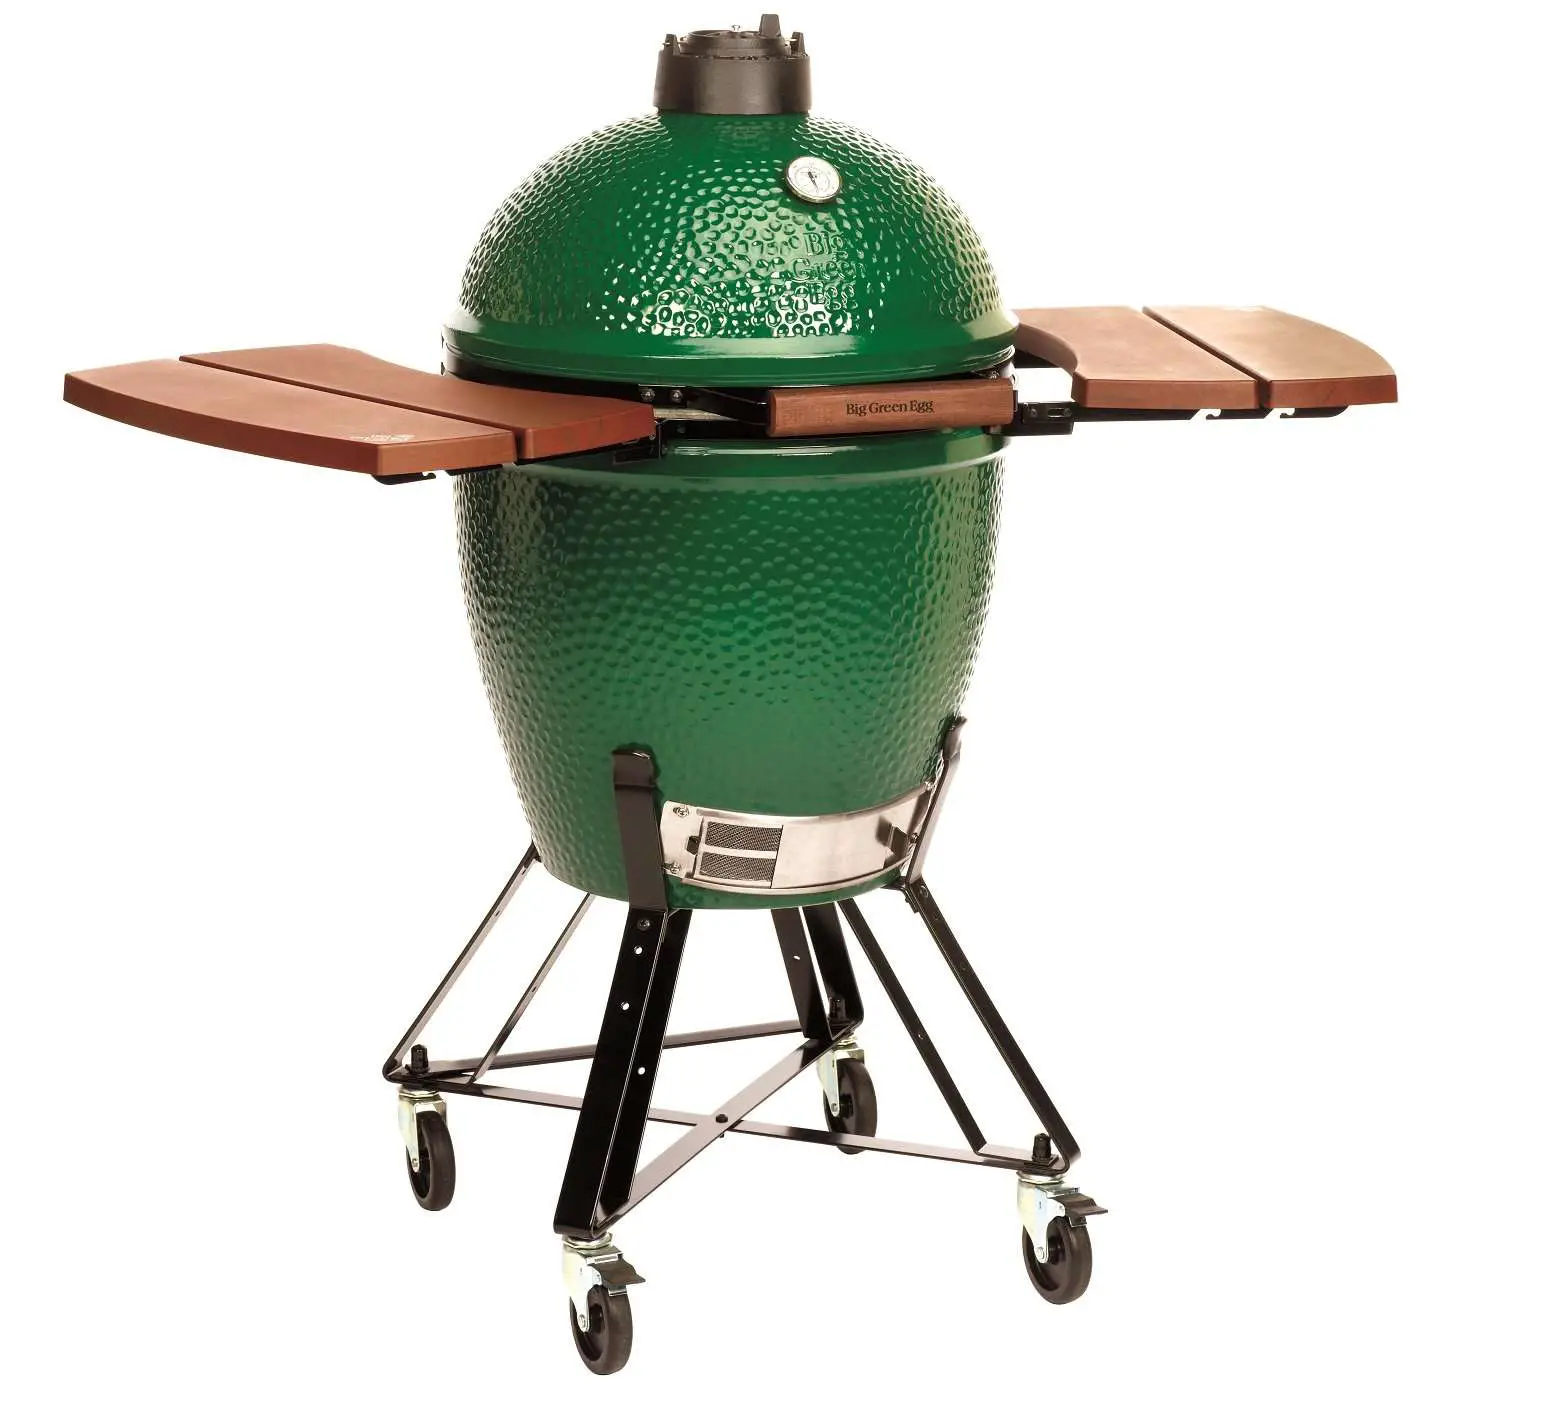 Big Green Egg Prices for 2020 * New Updates*